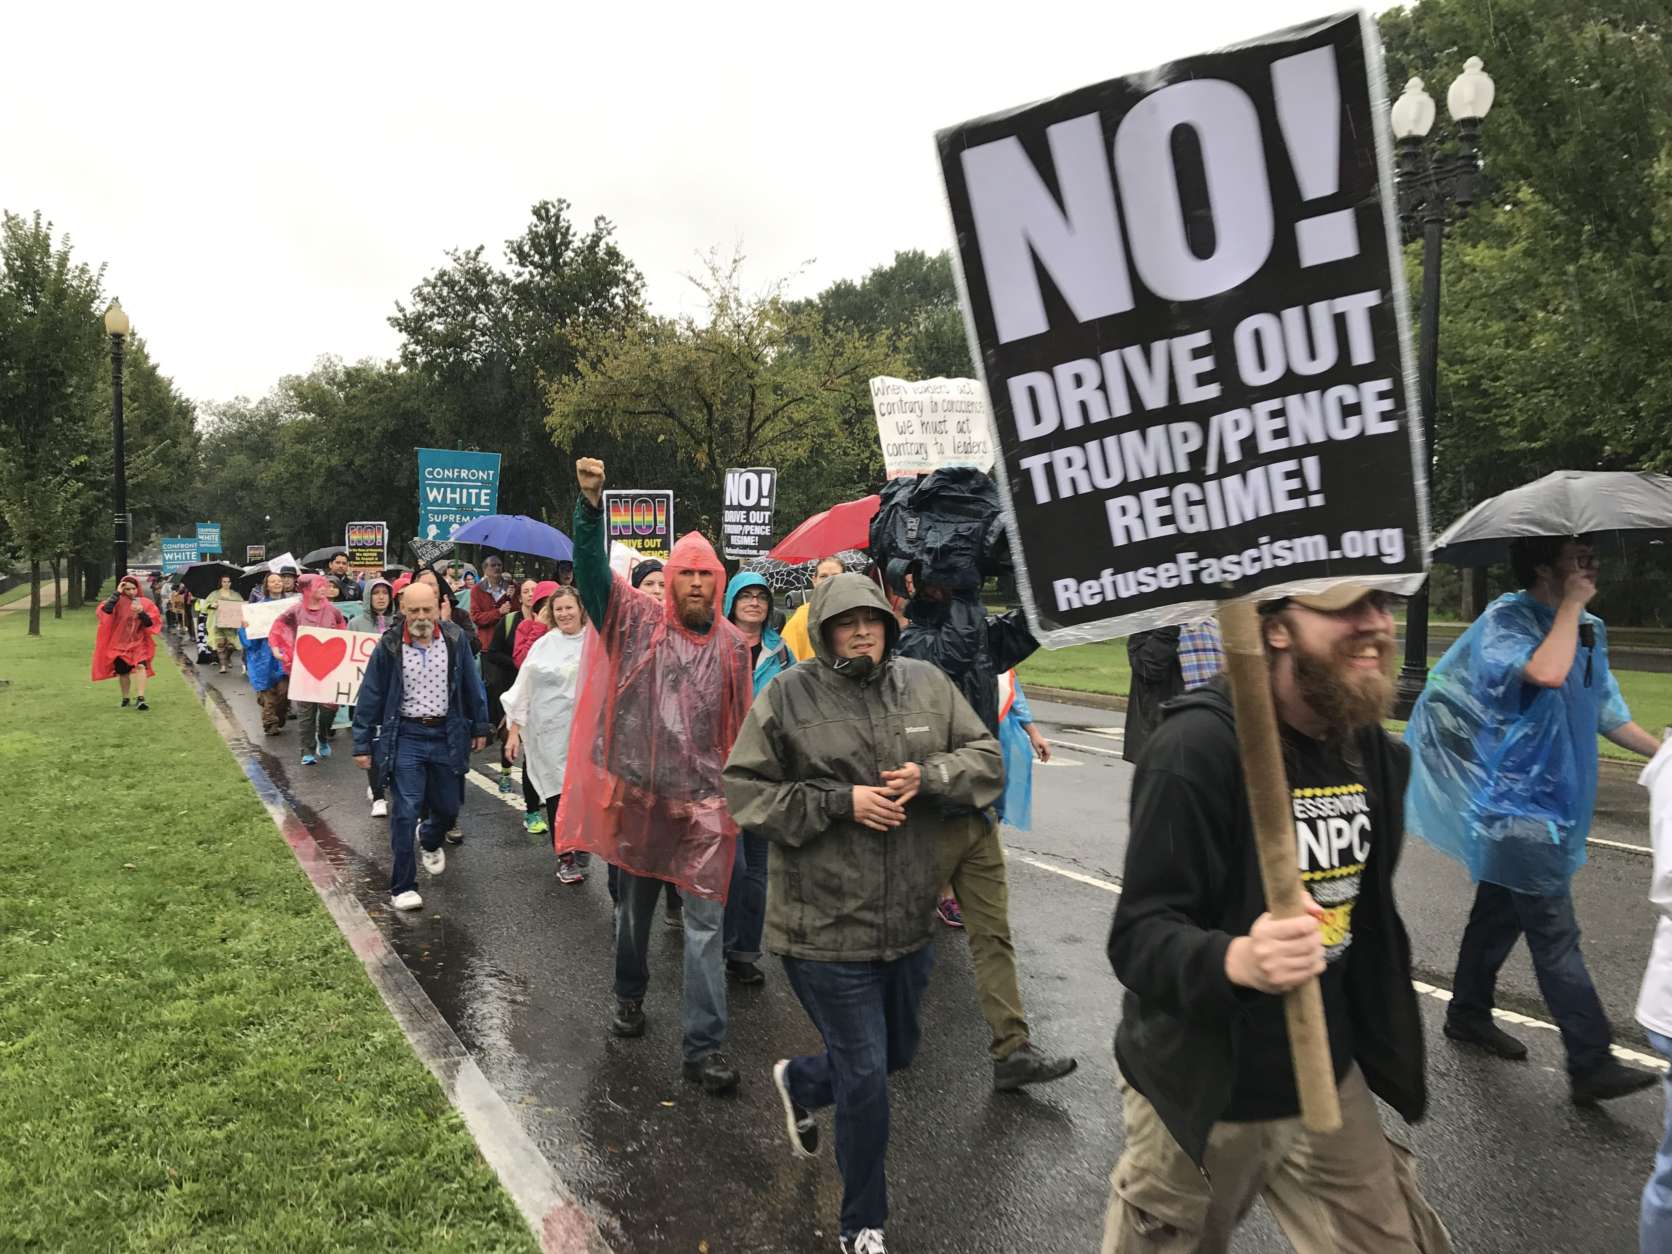 While protesters walked various legs of the more-than-100-mile route from Charlottesville, a large crowd joined the small band of marchers for the final few miles from Rosslyn into D.C. (WTOP/Dick Uliano)